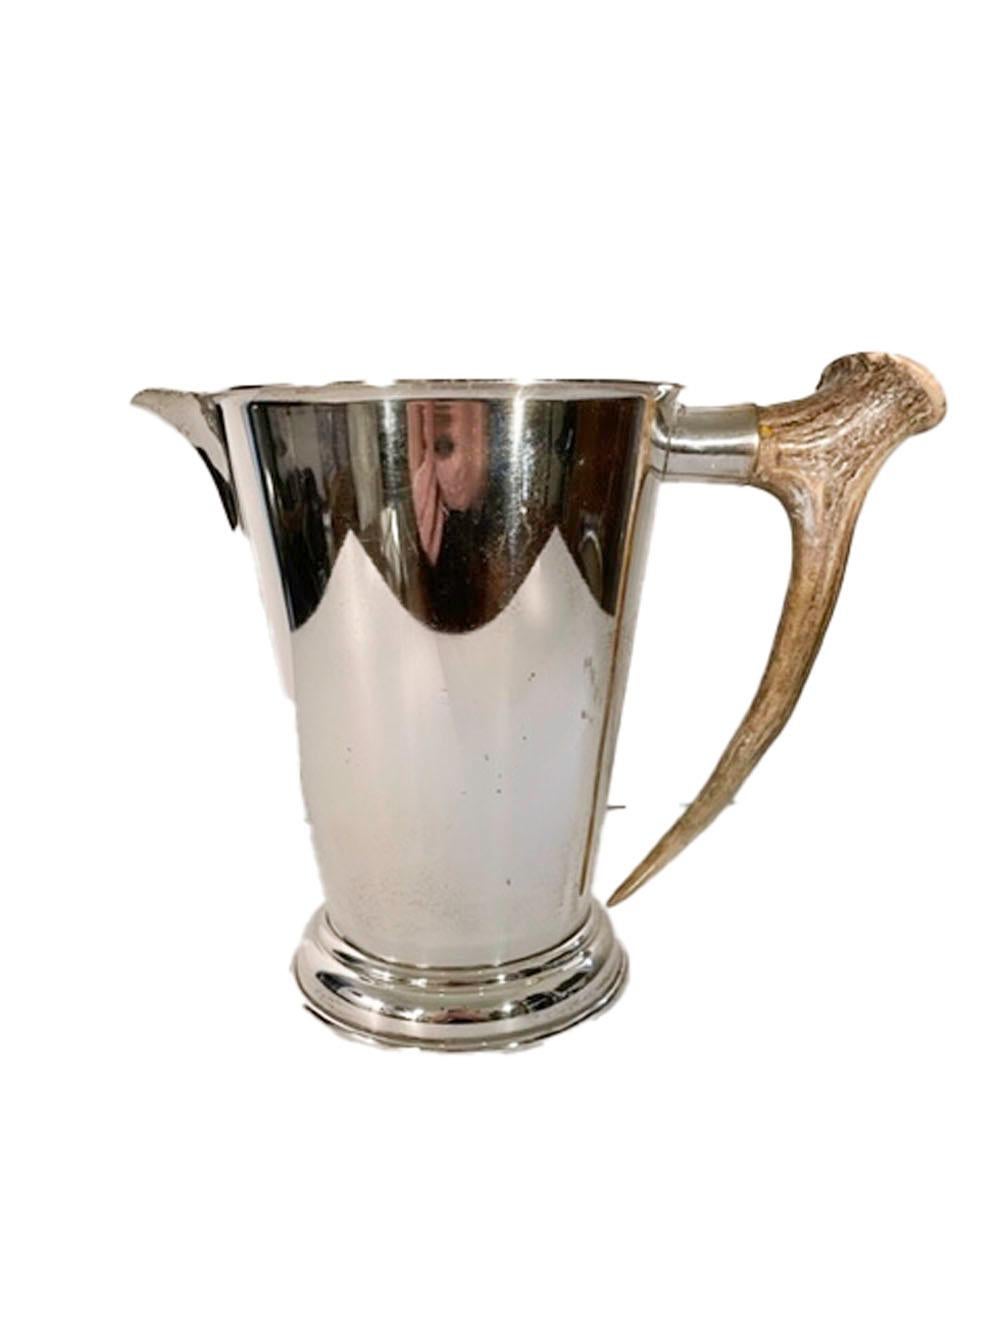 English Large Edwardian Silver Plate Water Pitcher w/Antler Handle by P.H. Vogel & Co. For Sale